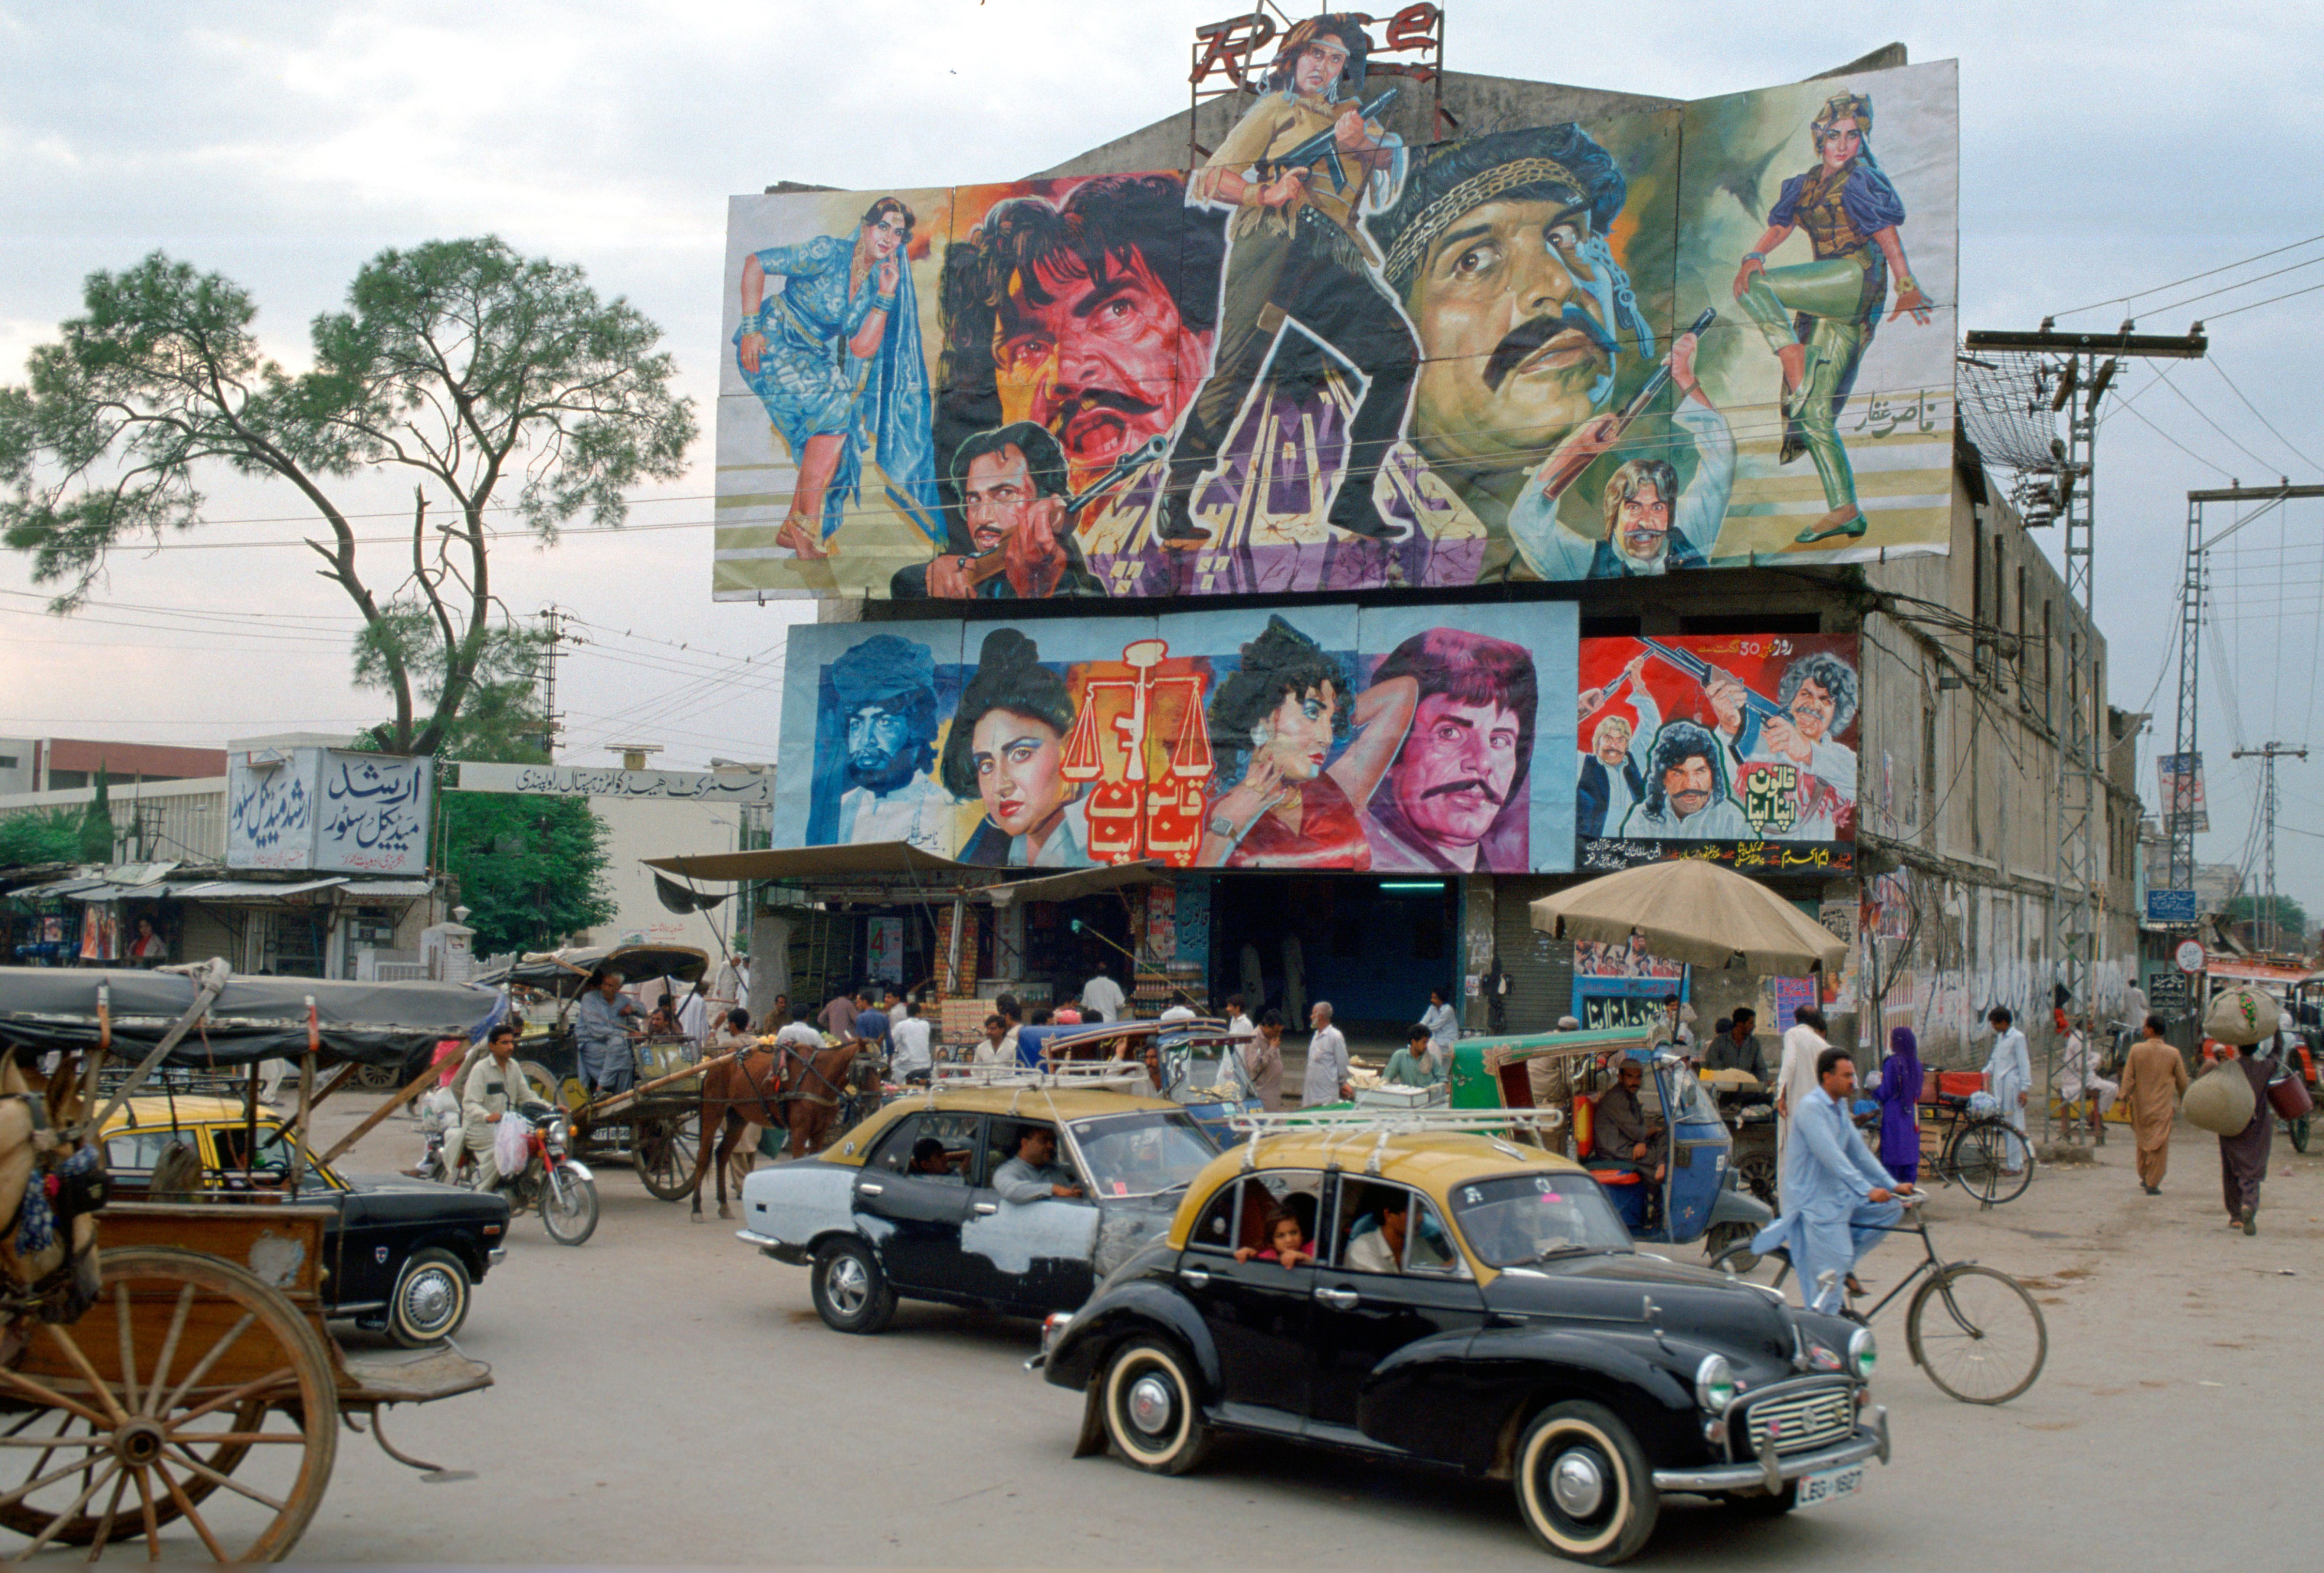 Street scene in Islamabad, Pakistan showing rickshaws, an old two-tone Morris Minor car and the local cinema advertising films often described as "Bollywood'. (Tim Graham—Getty Images)